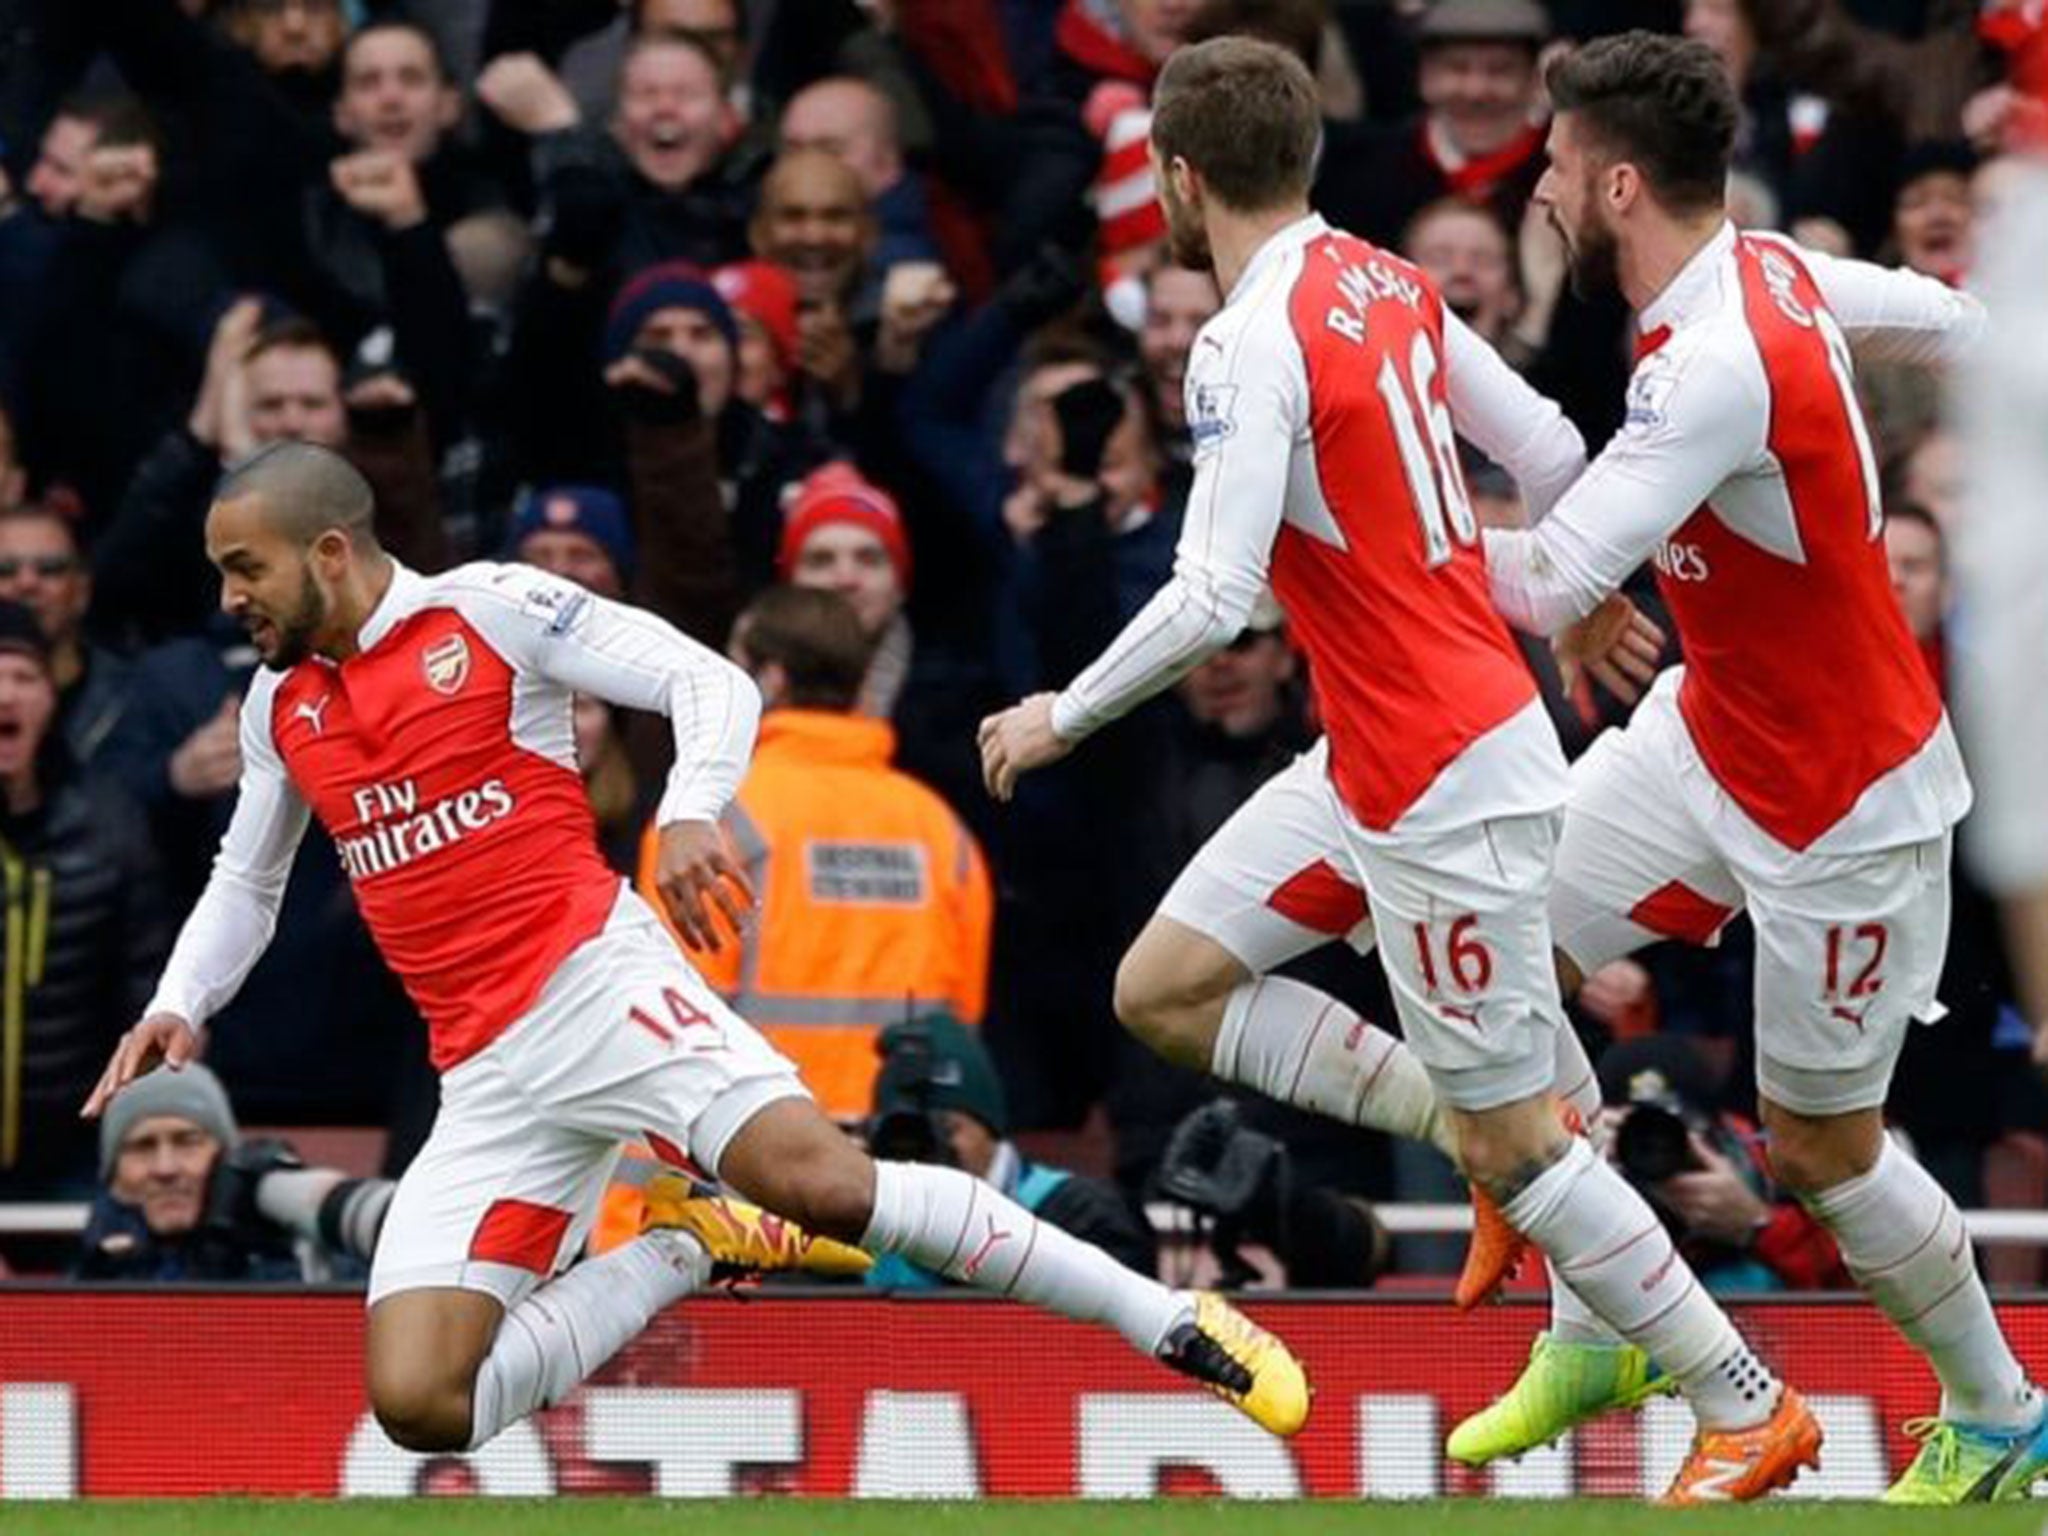 Theo Walcott is thrown to the ground by Olivier Giroud in celebration after his goal for Arsenal